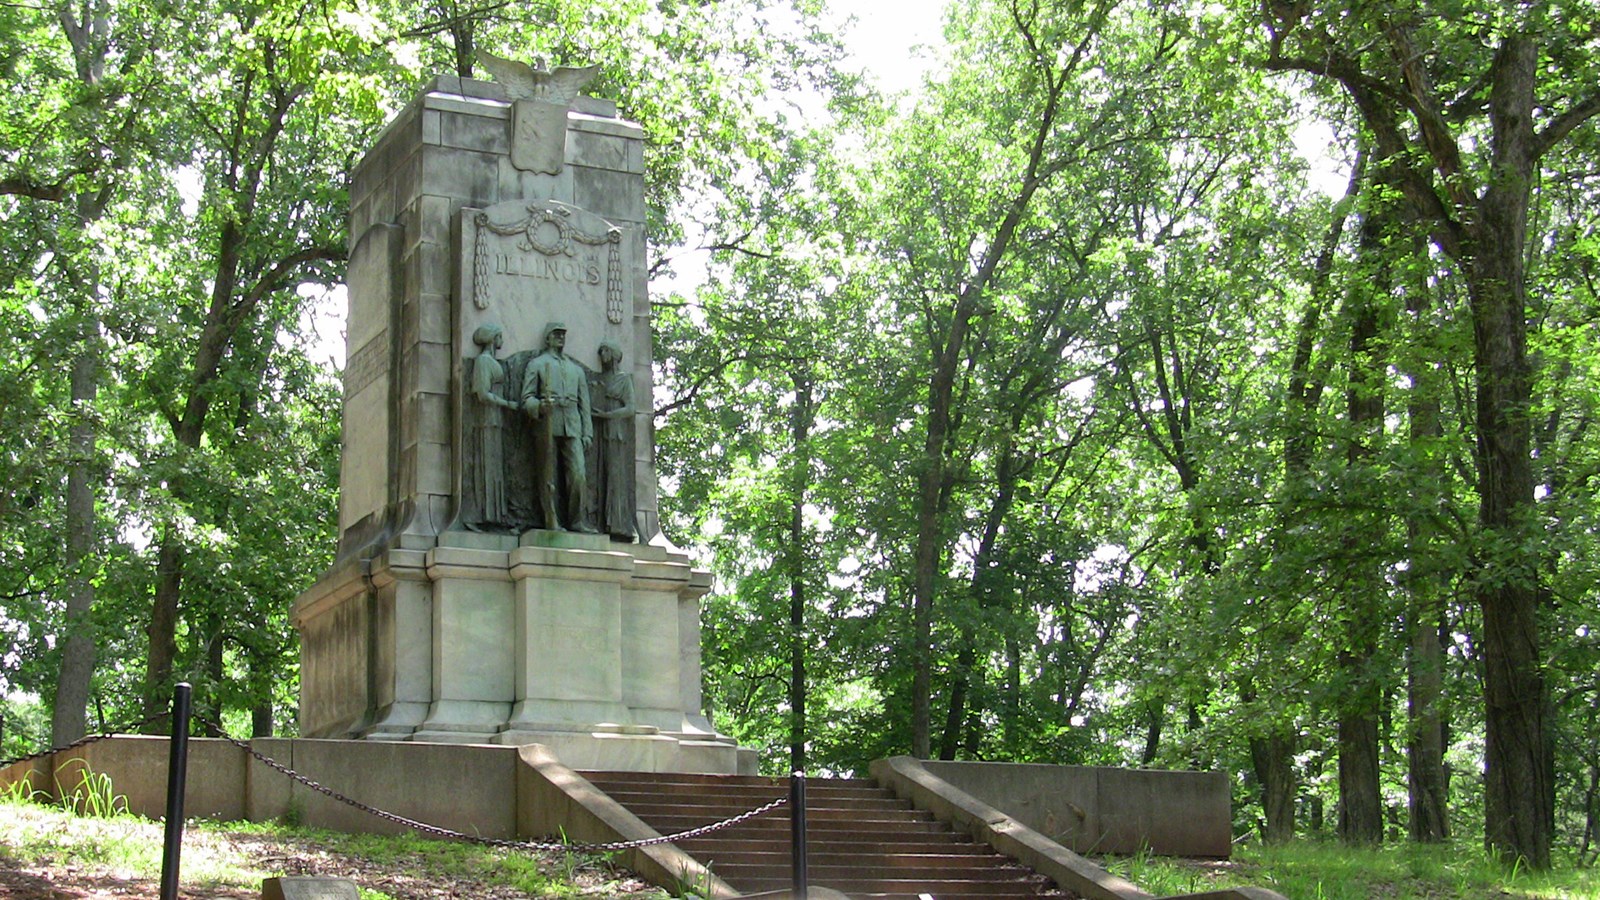 The Illinois Monument in Spring